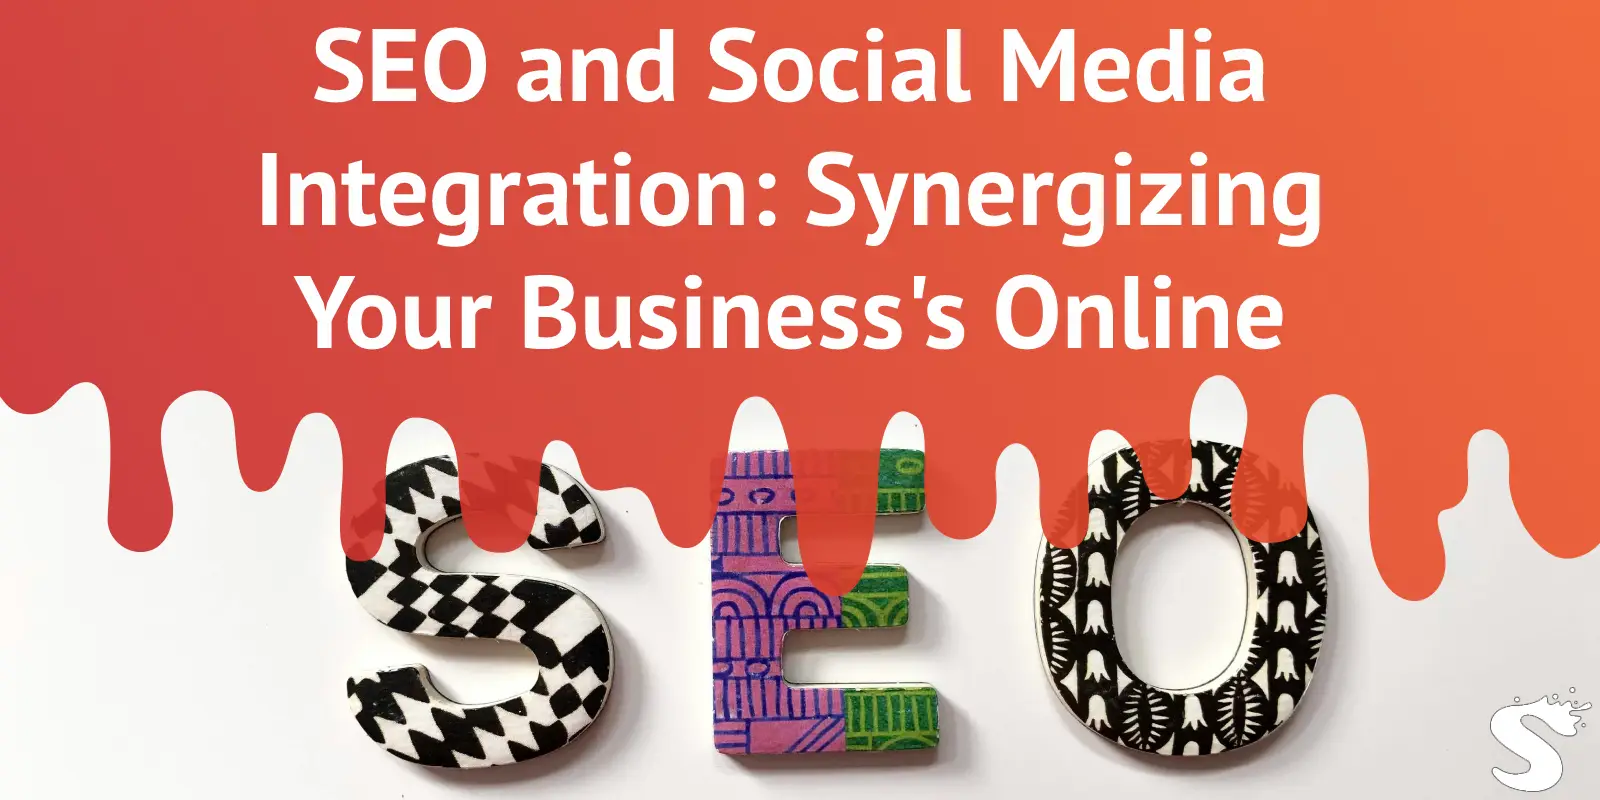 SEO and Social Media Integration: Synergizing Your Business's Online Presence